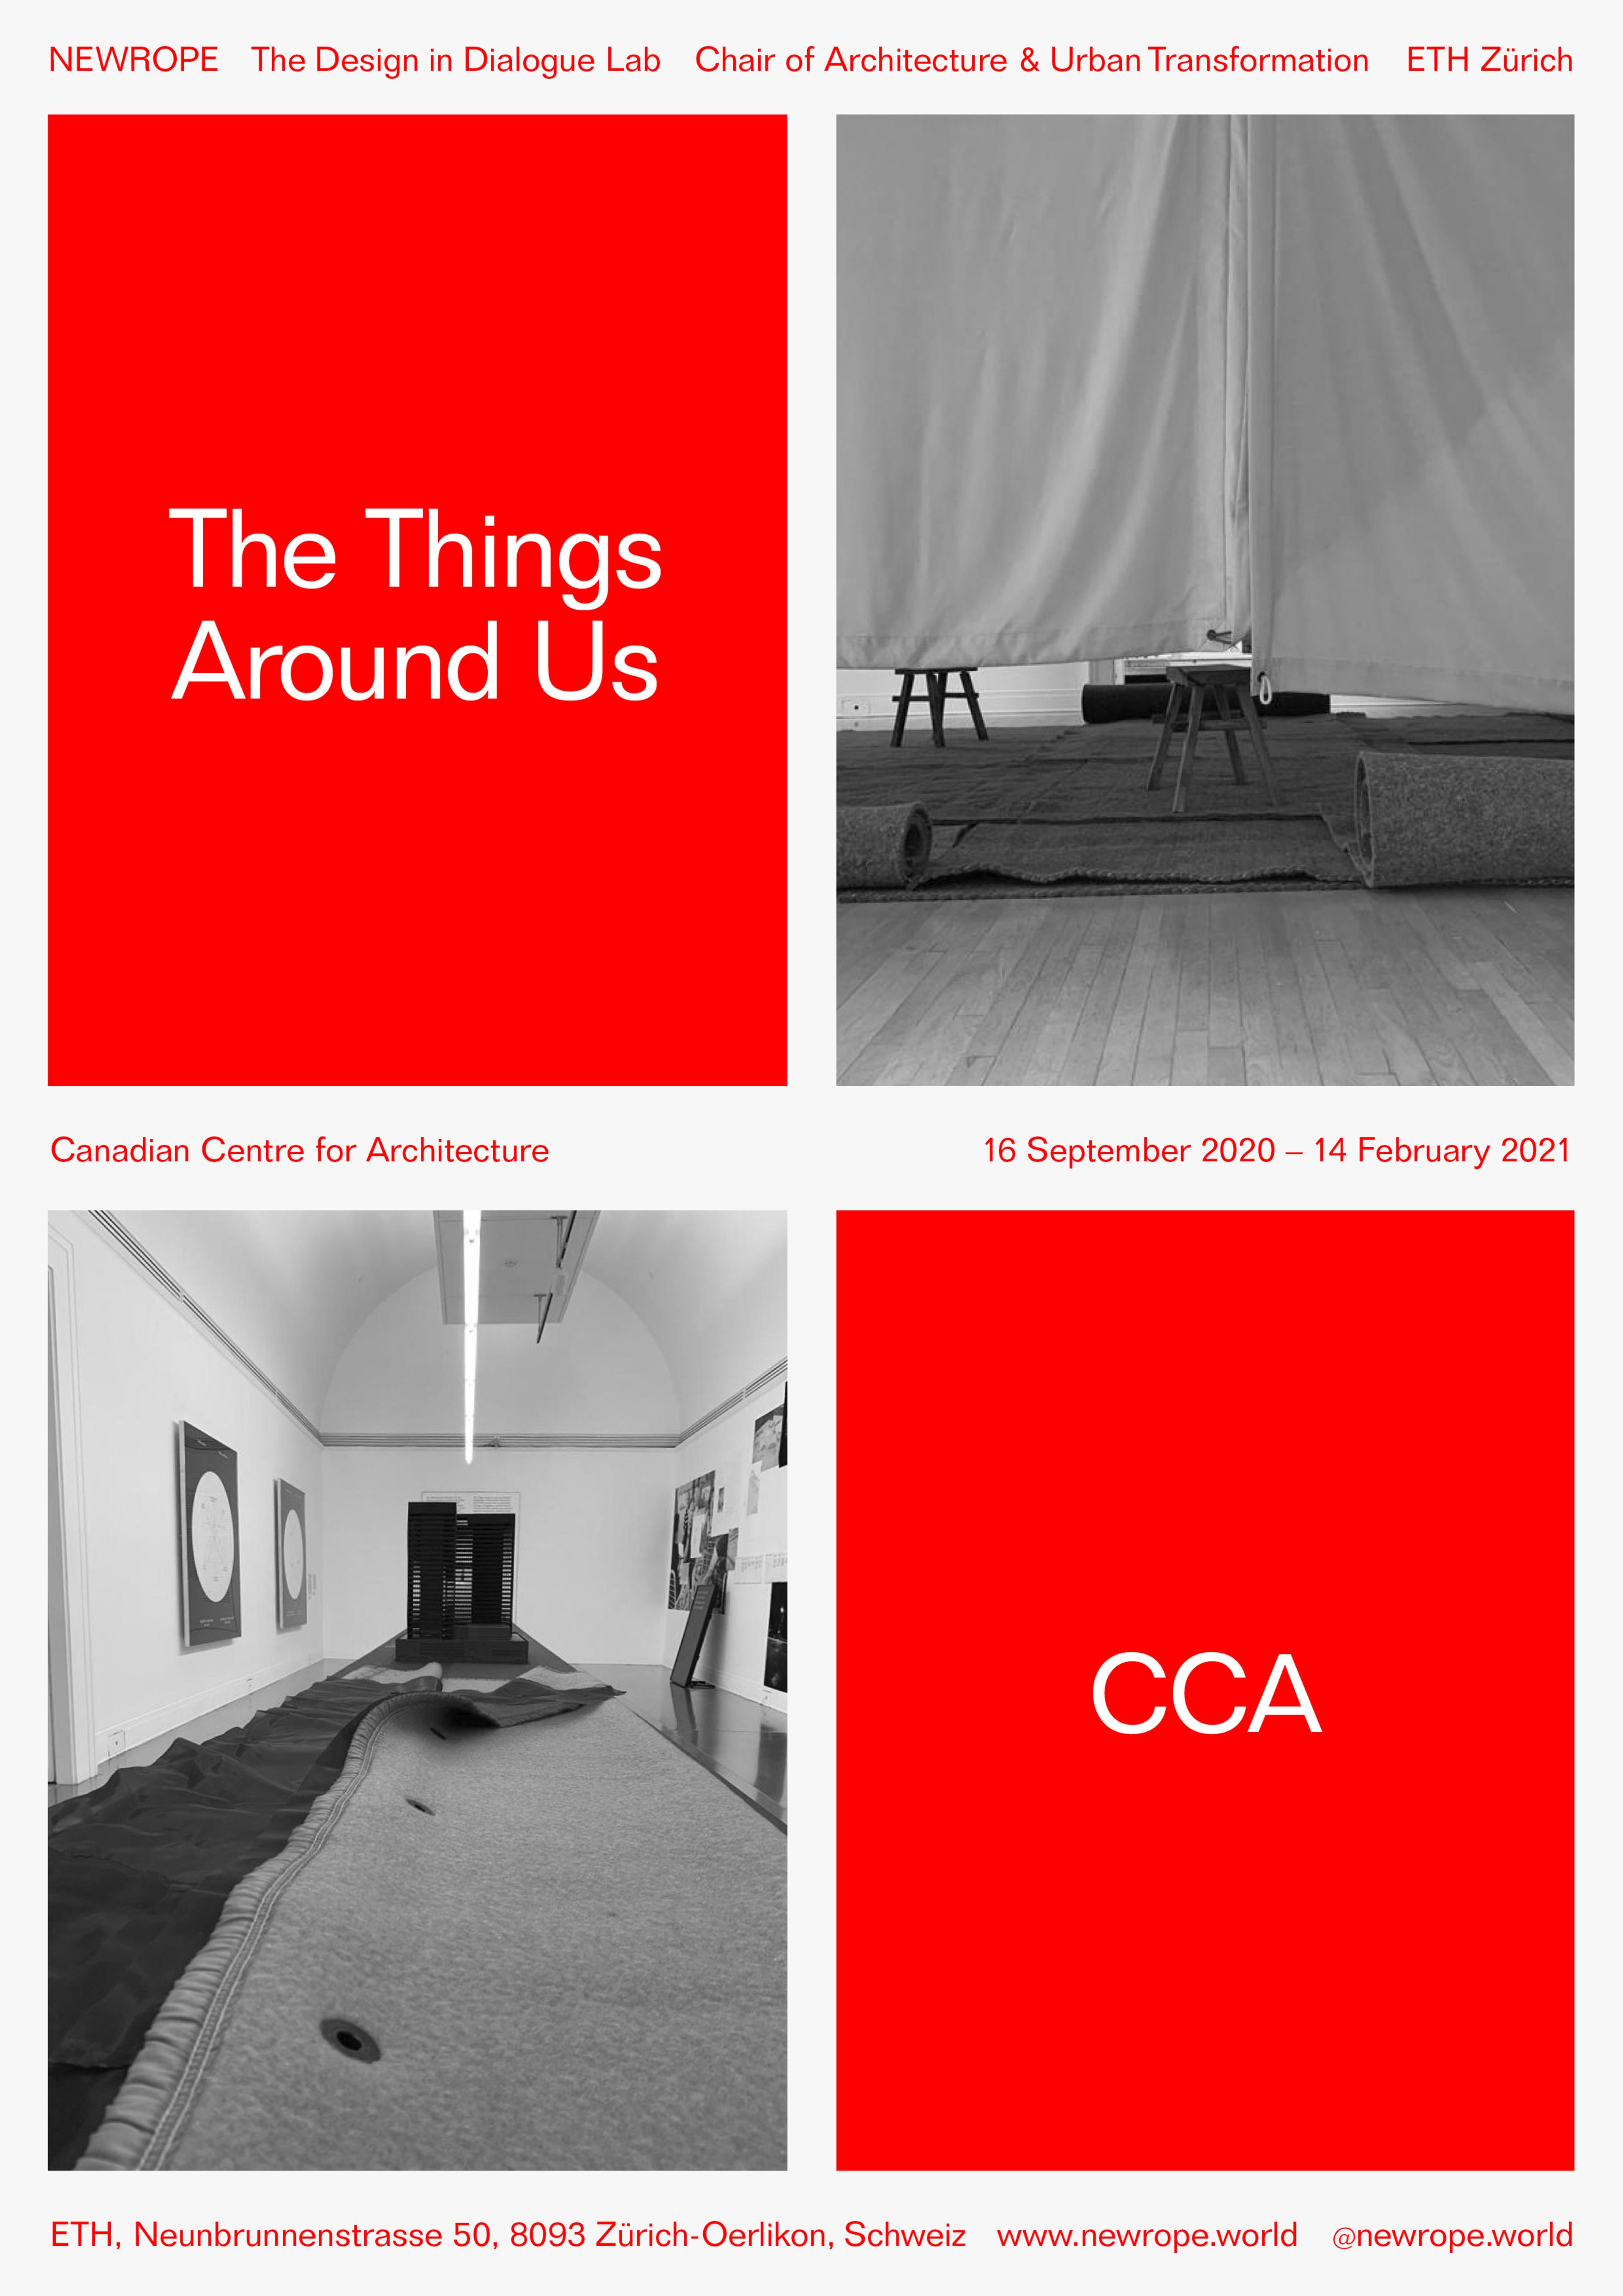 Announcement: Exhibition, The Things Around Us, CCA